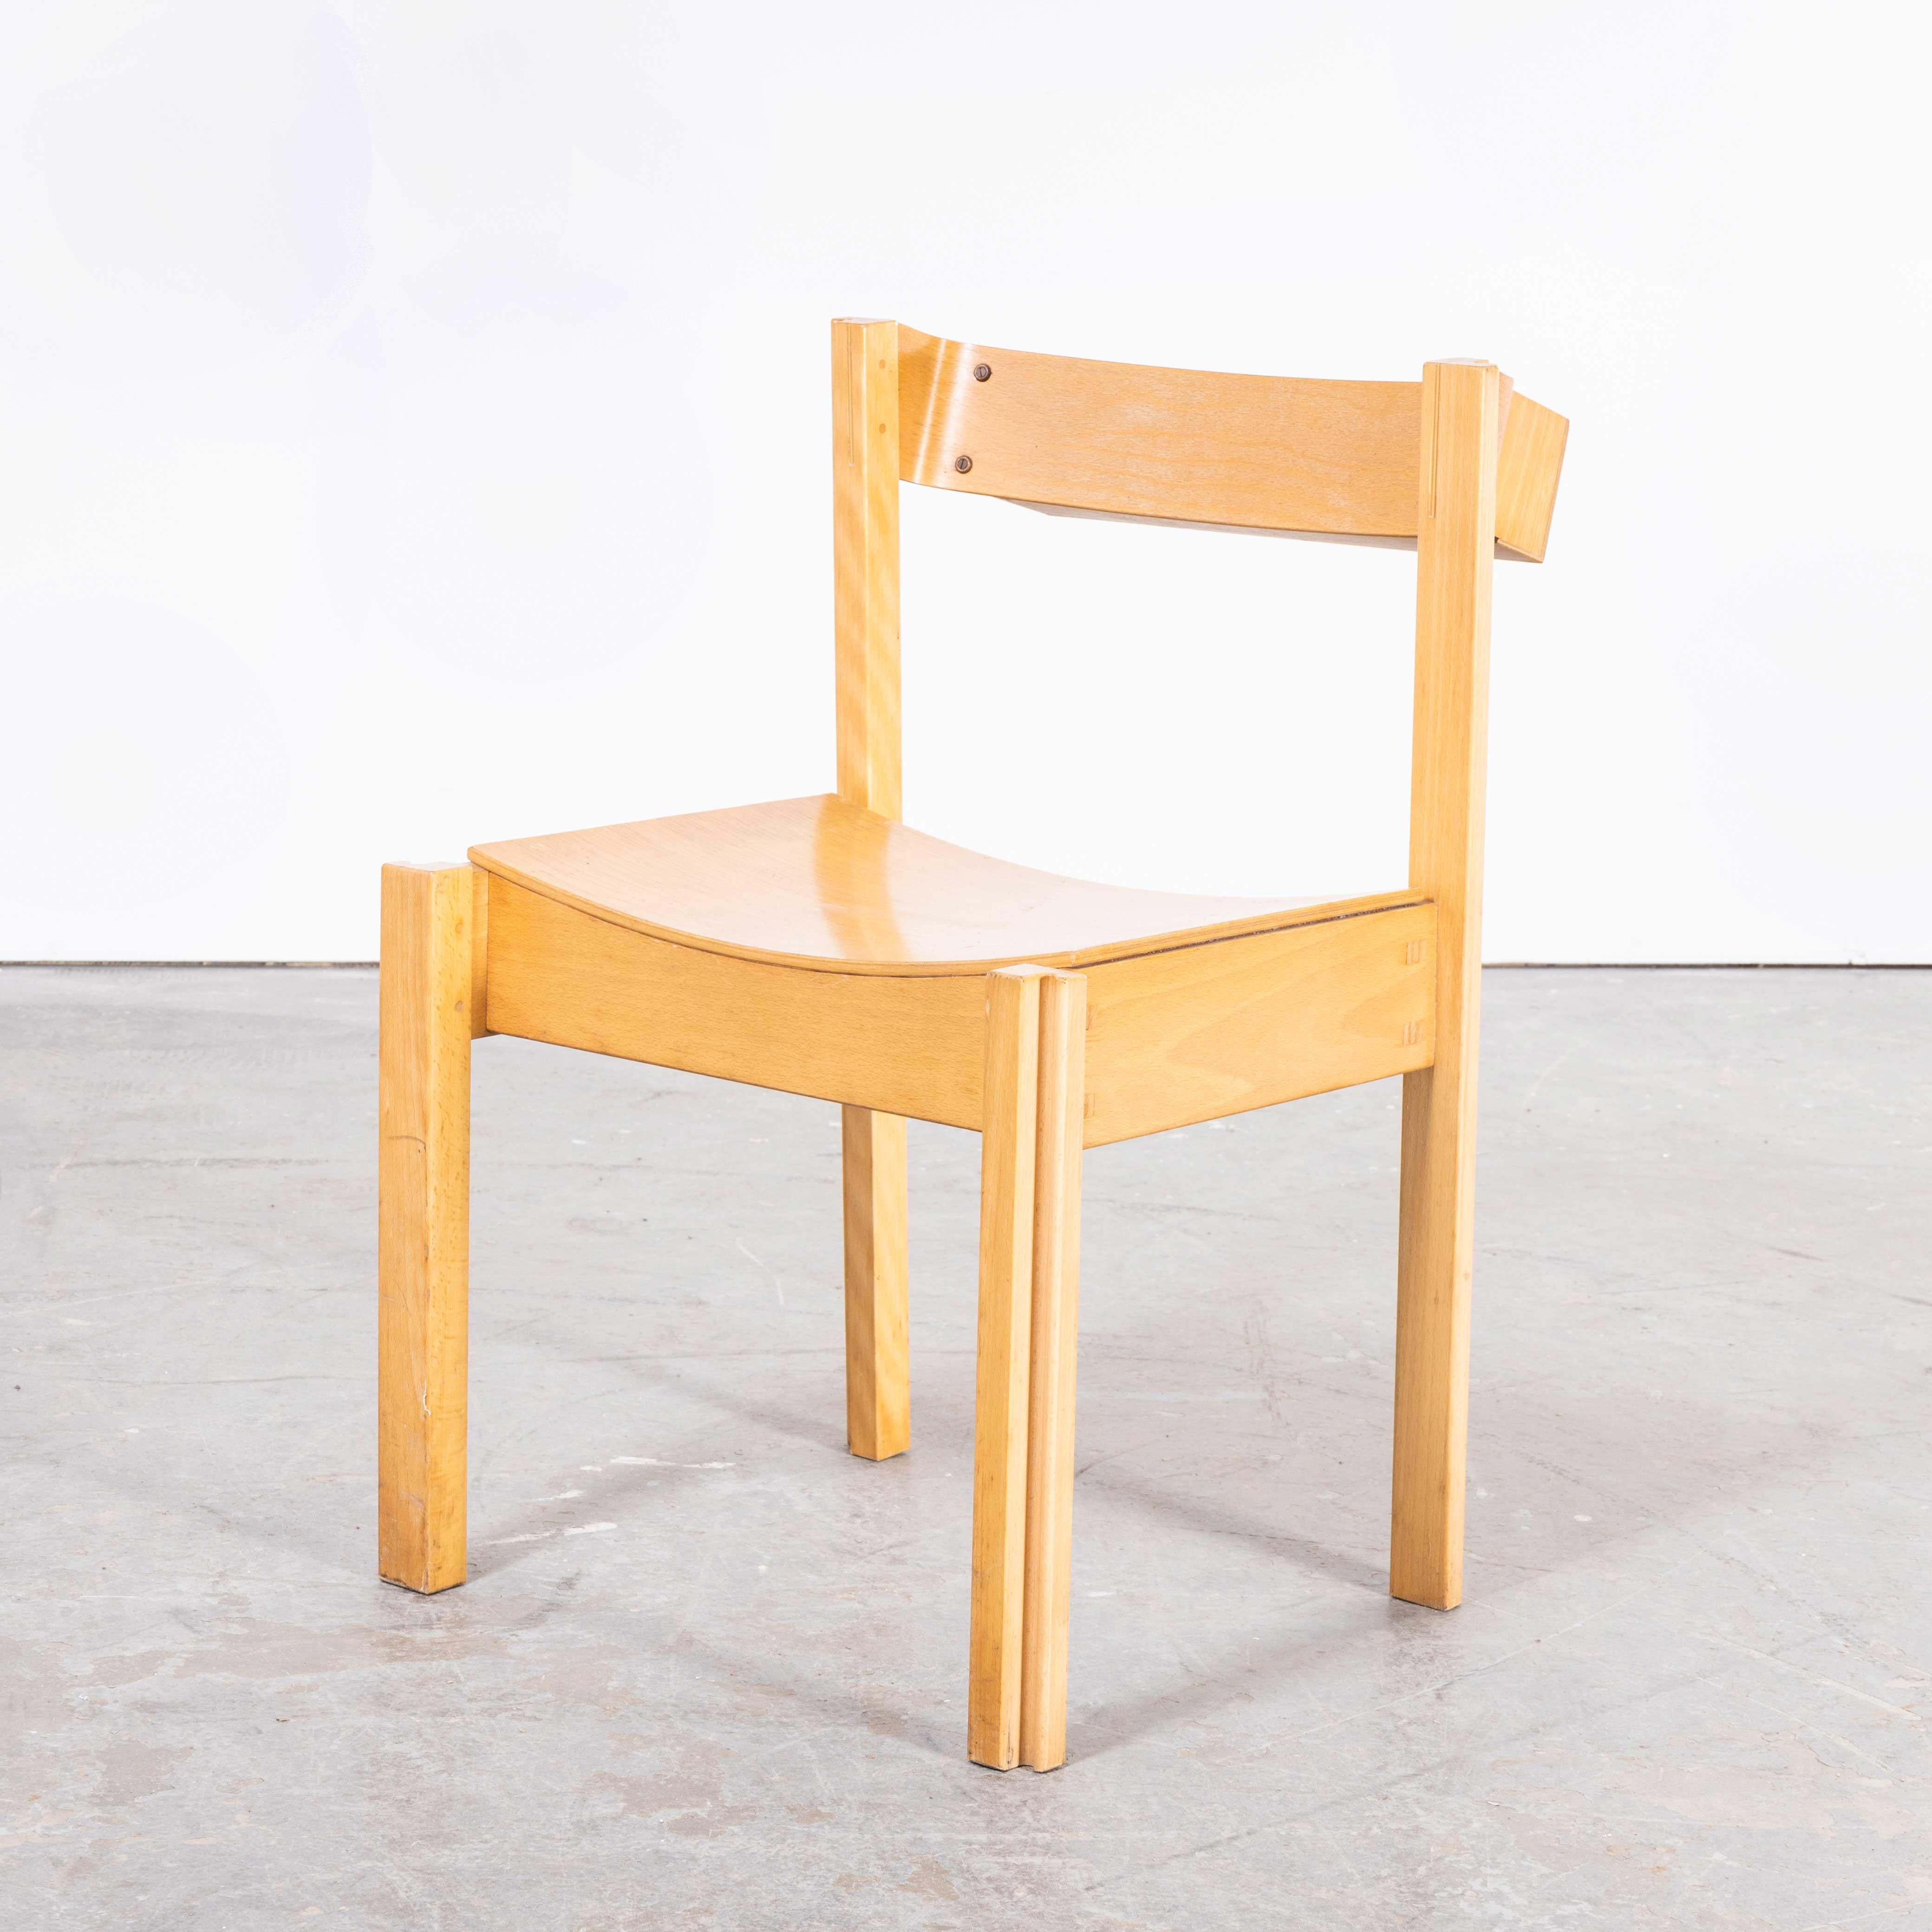 1960’s Linking And Stacking Chairs By Clive Bacon – Last Few Remaining
1960’s Linking And Stacking Chairs By Clive Bacon – Last Few Remaining. Bacon’s ingenious jigsaw leg design enables the chairs to be connected together to form solid rows and